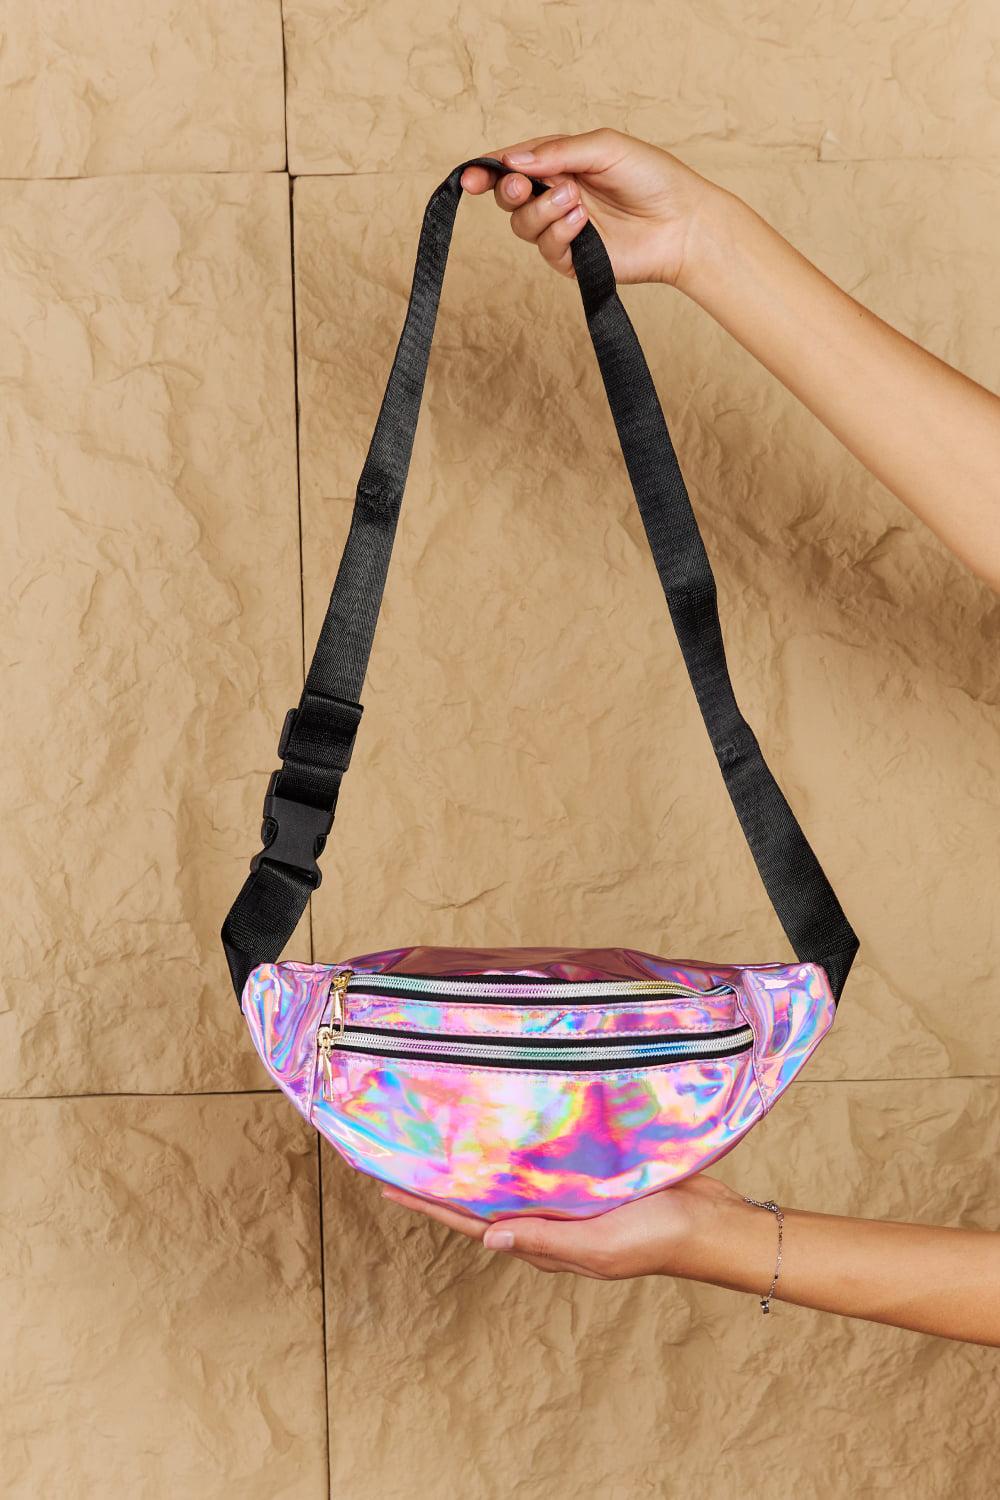 Fame Good Vibrations Holographic Double Zipper Fanny Pack in Hot Pink BLUE ZONE PLANET